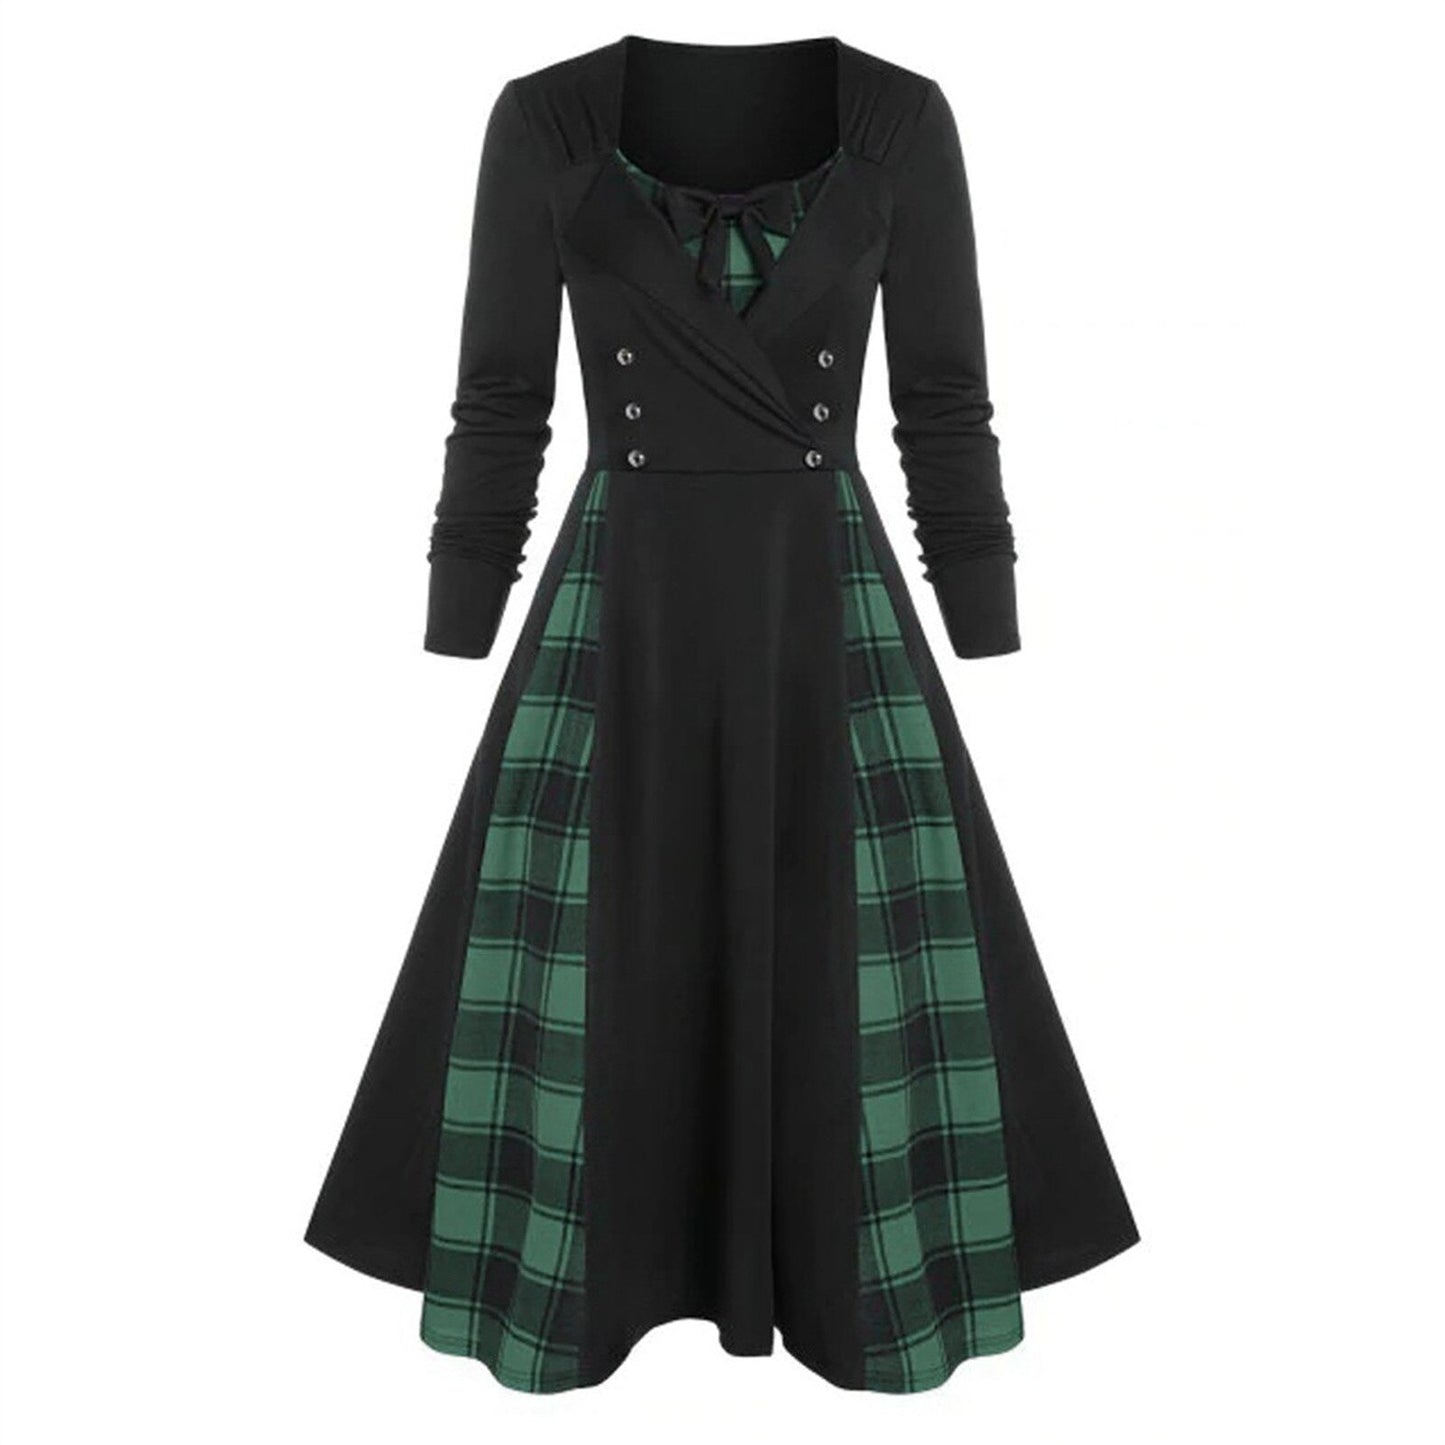 Wipalo Vintage Dress Women Hooded Plaid Mock Button Overlap Midi Dress Gothic Punk Long Sleeve Casual Sexy Party Dress Harajuku